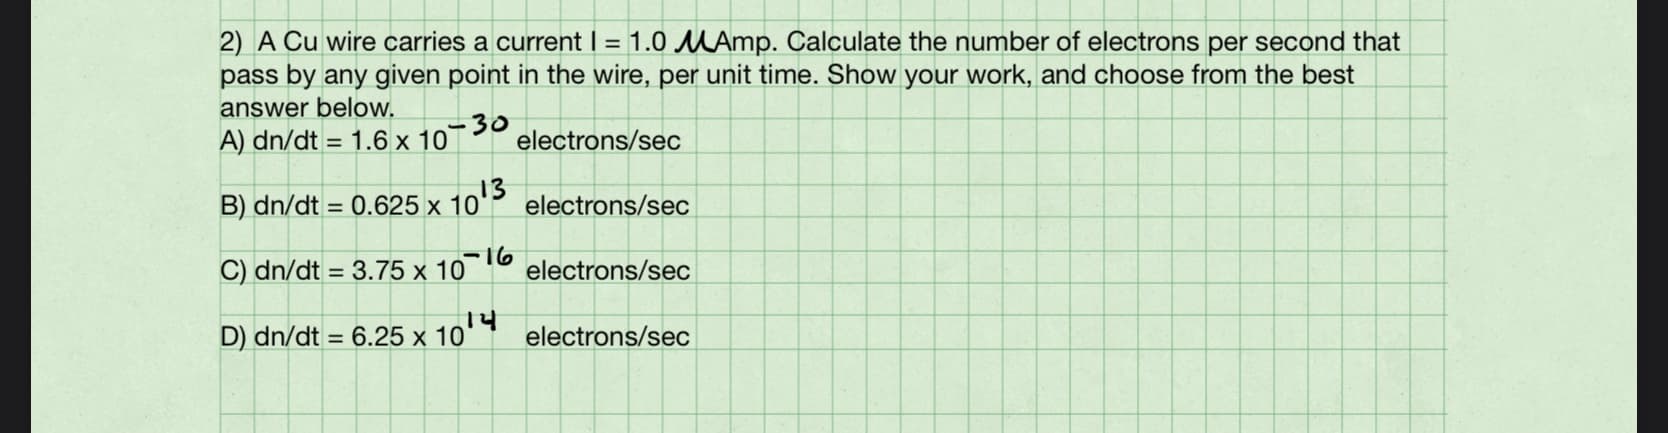 2) A Cu wire carries a current I = 1.0 MAmp. Calculate the number of electrons per second that
pass by any given point in the wire, per unit time. Show your work, and choose from the best
answer below.
A) dn/dt = 1.6 x 10
30
electrons/sec
B) dn/dt = 0.625 x 10'
10'3
electrons/sec
C) dn/dt = 3.75 x 106
electrons/sec
D) dn/dt = 6.25 x 10
electrons/sec
%3D
